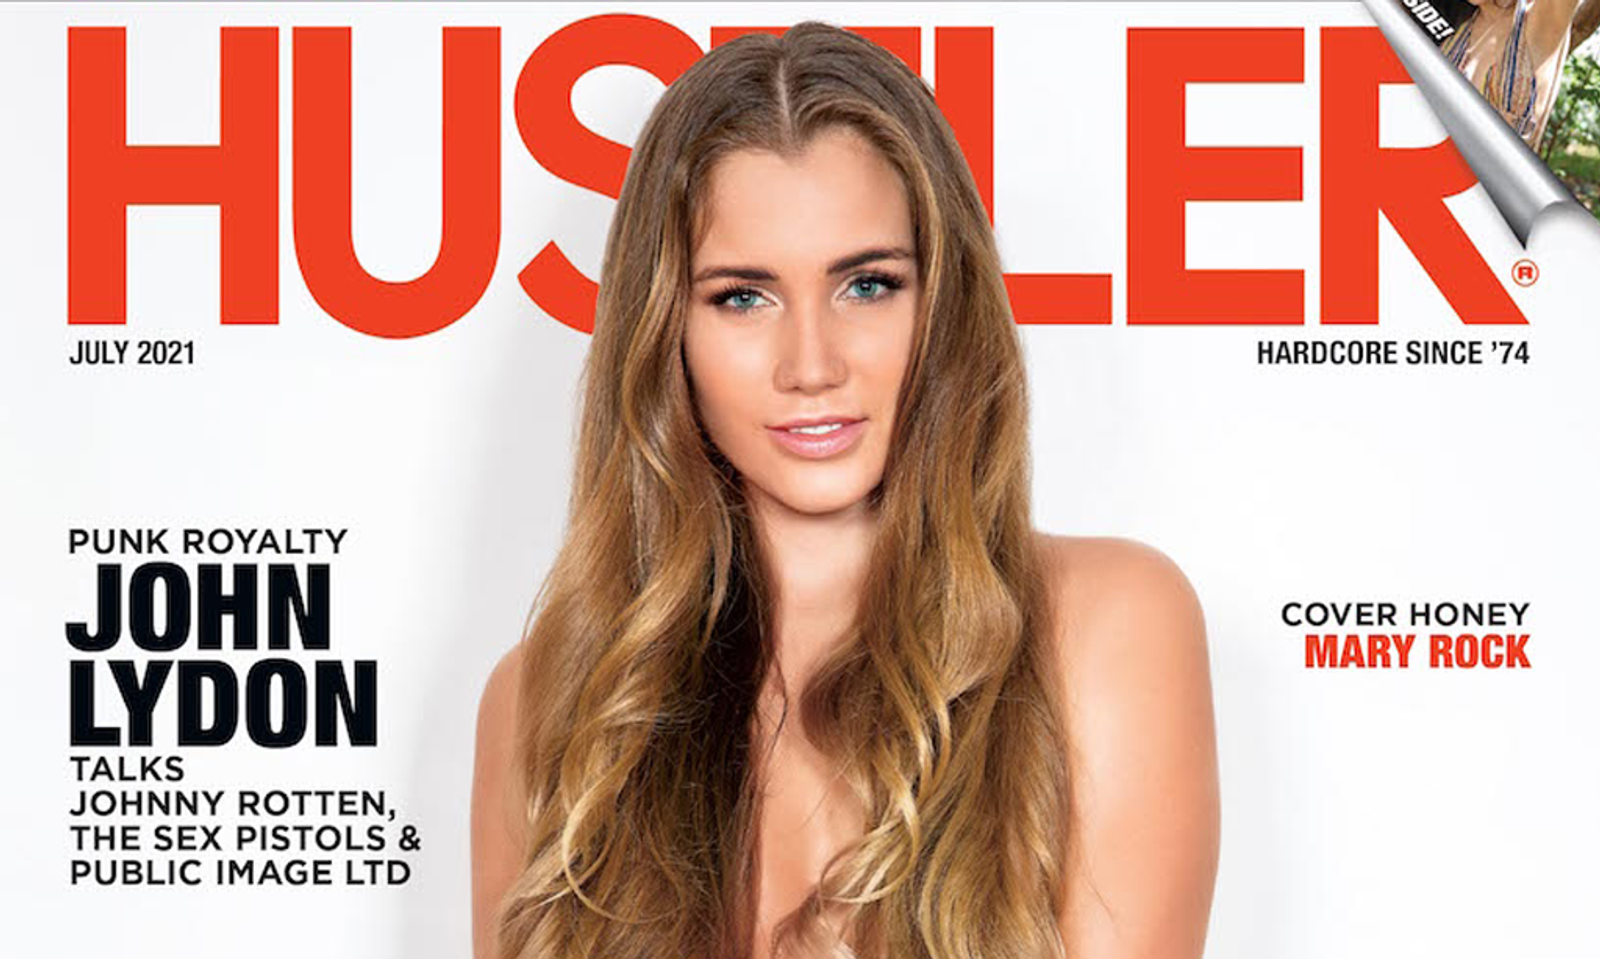 Liz Flynt Takes Over Publisher Role at 'Hustler' With July Issue